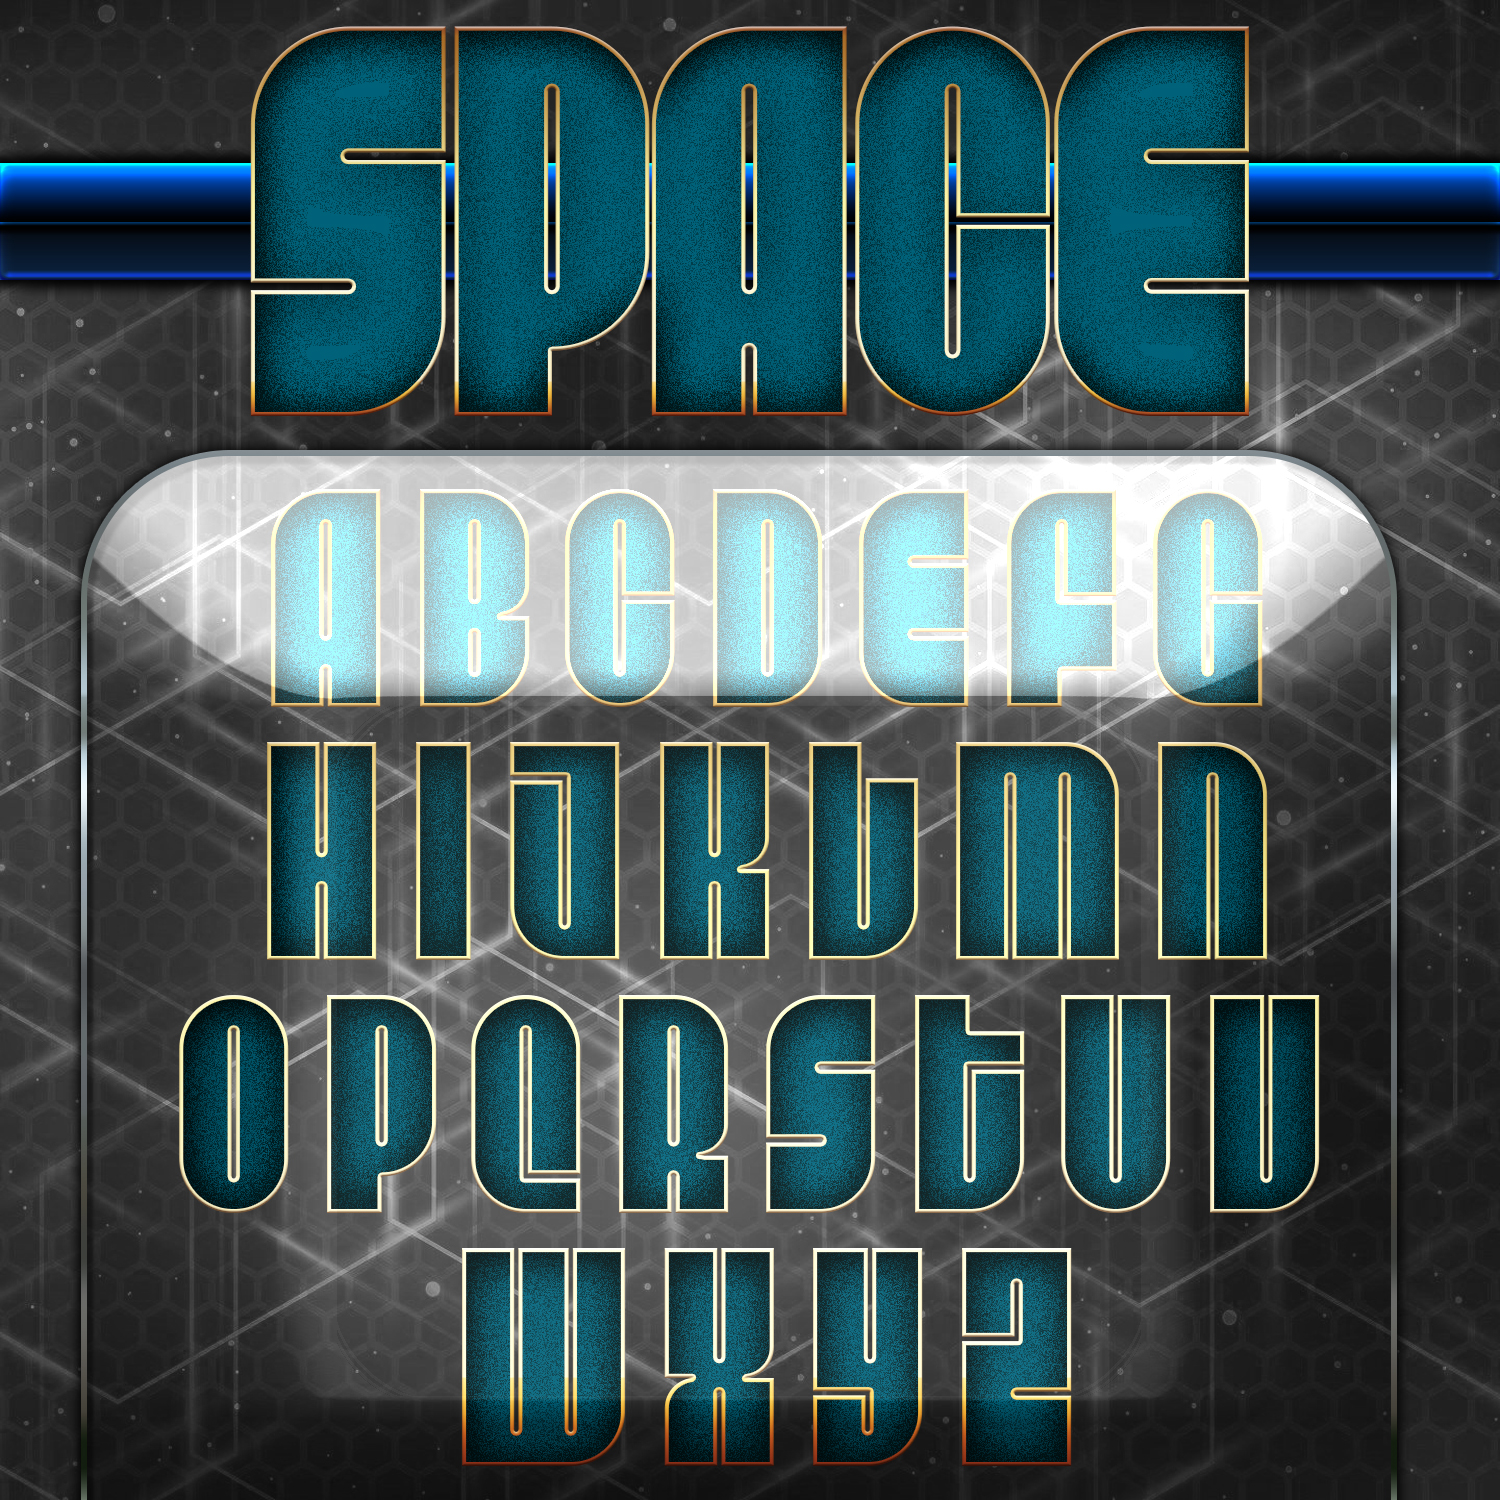 The space font is shown in alphabetical order.